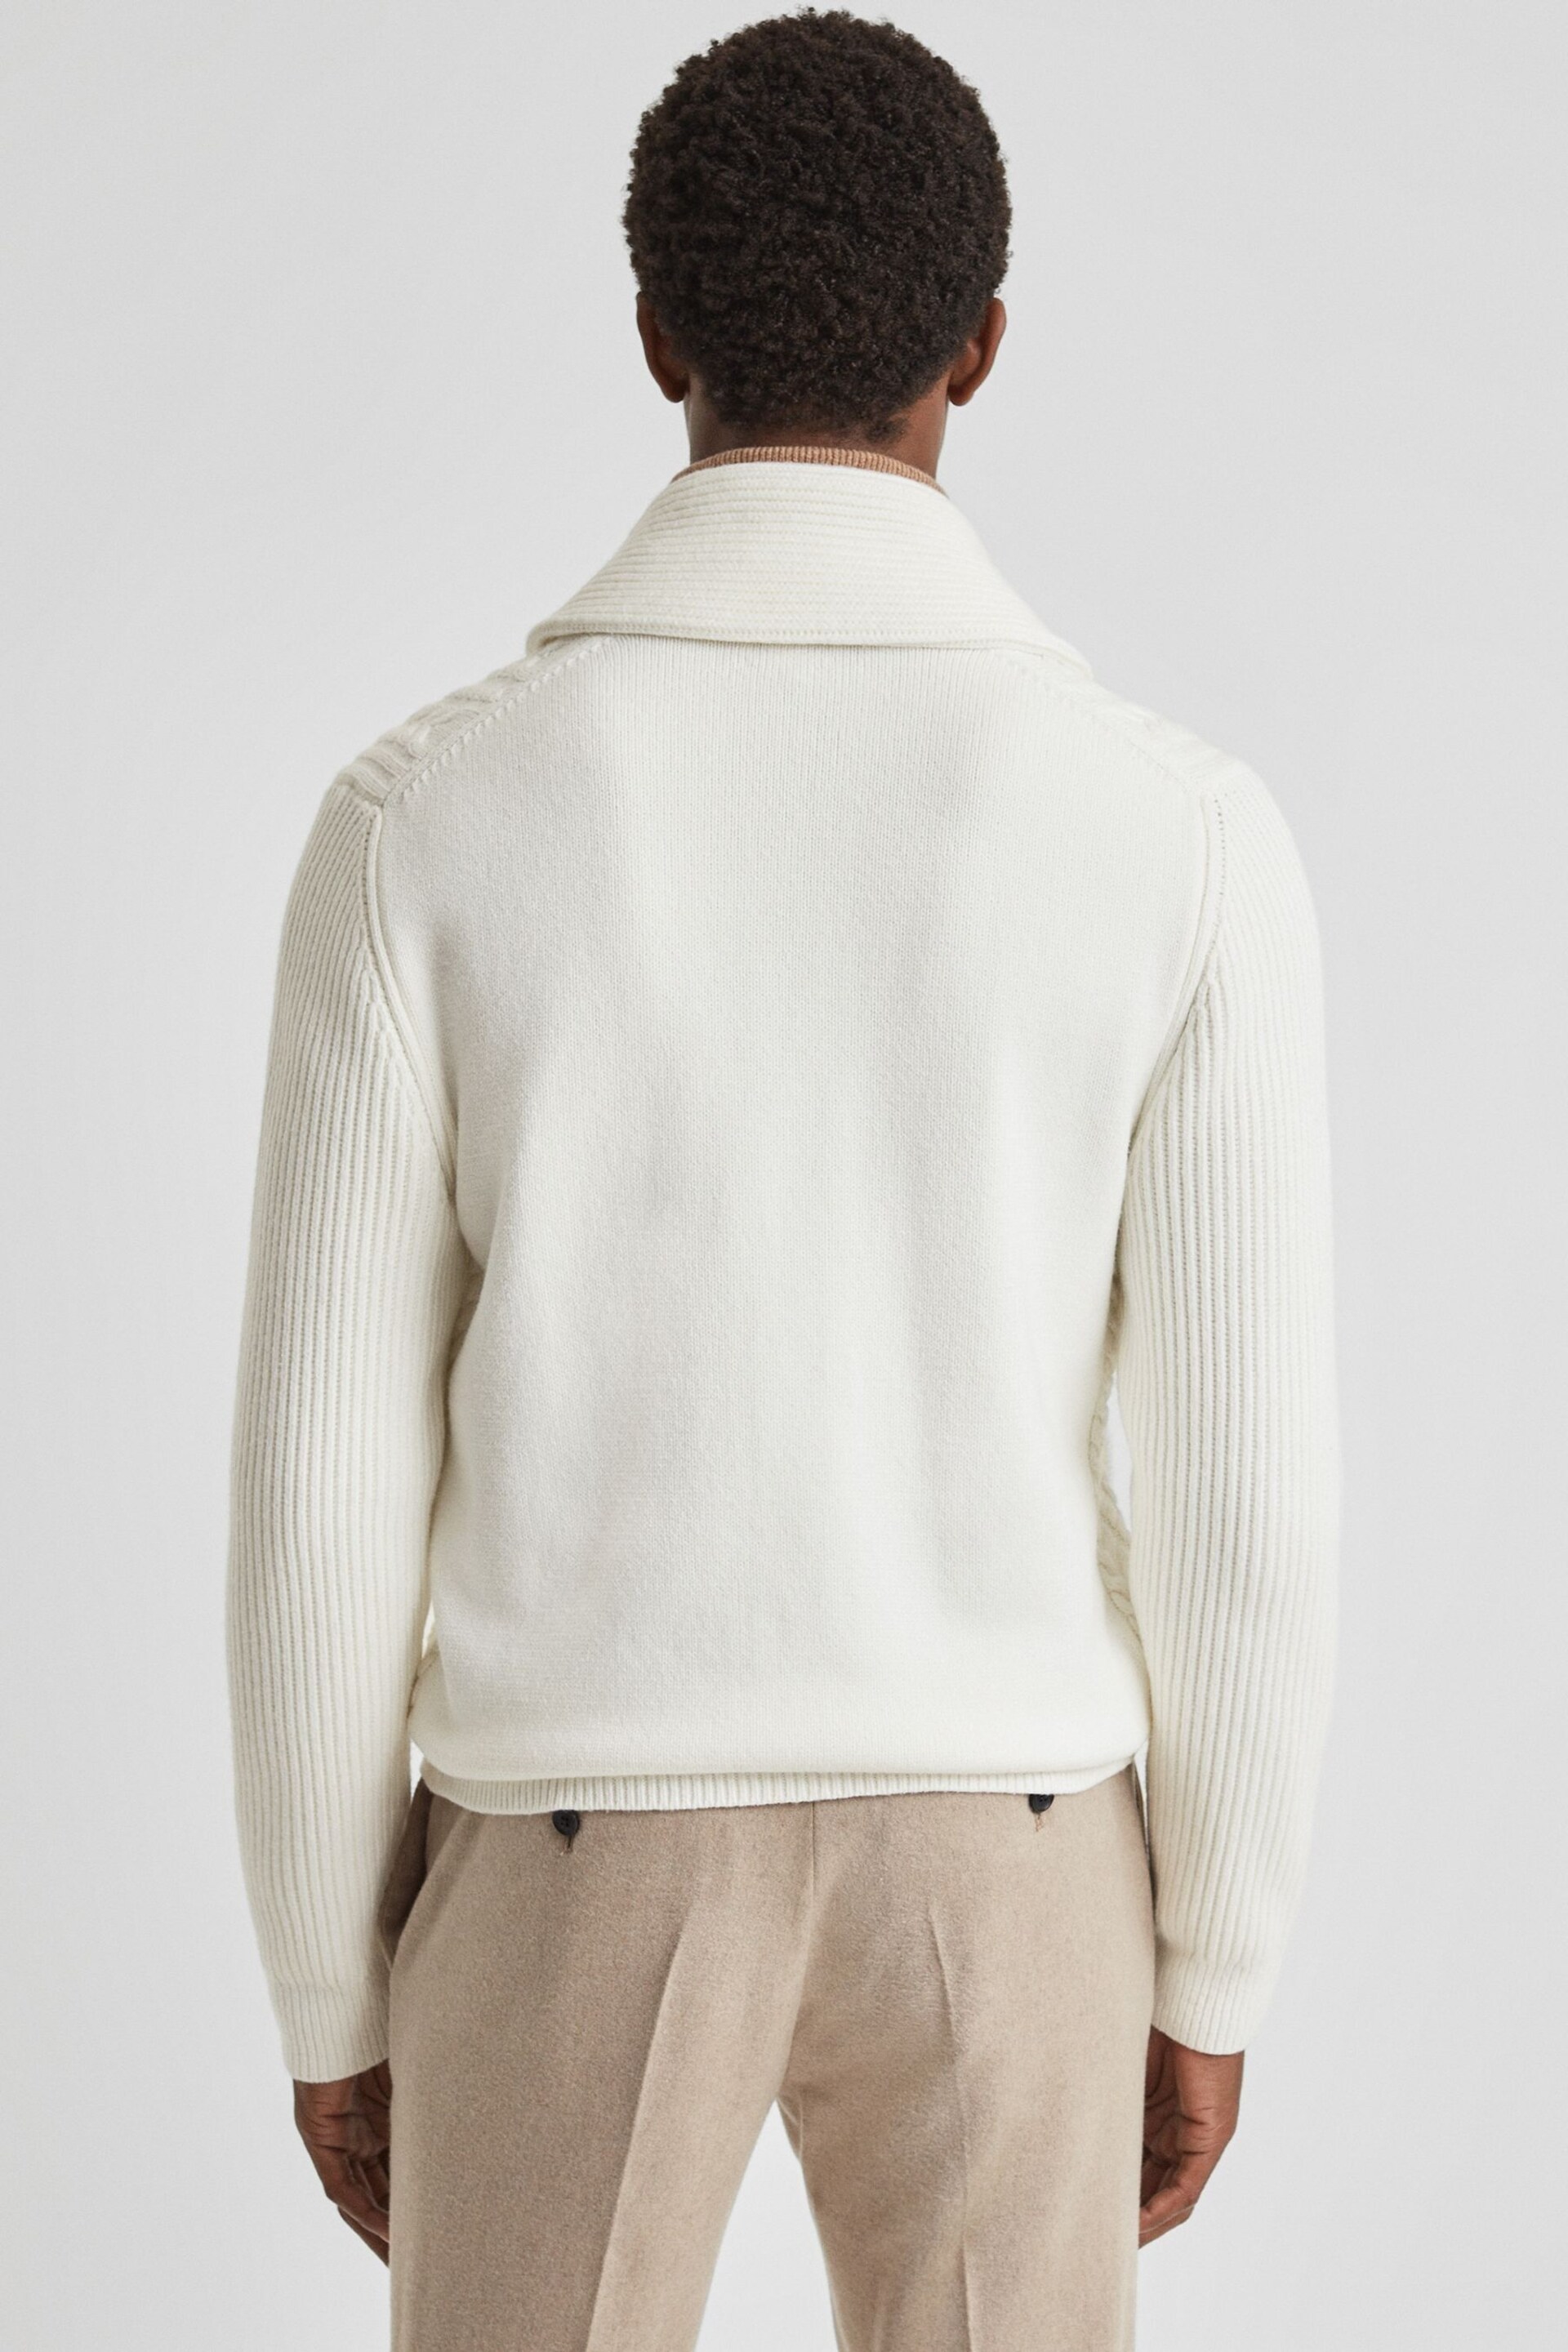 Reiss Ecru Ashbury Cable Knitted Cardigan - Image 6 of 6